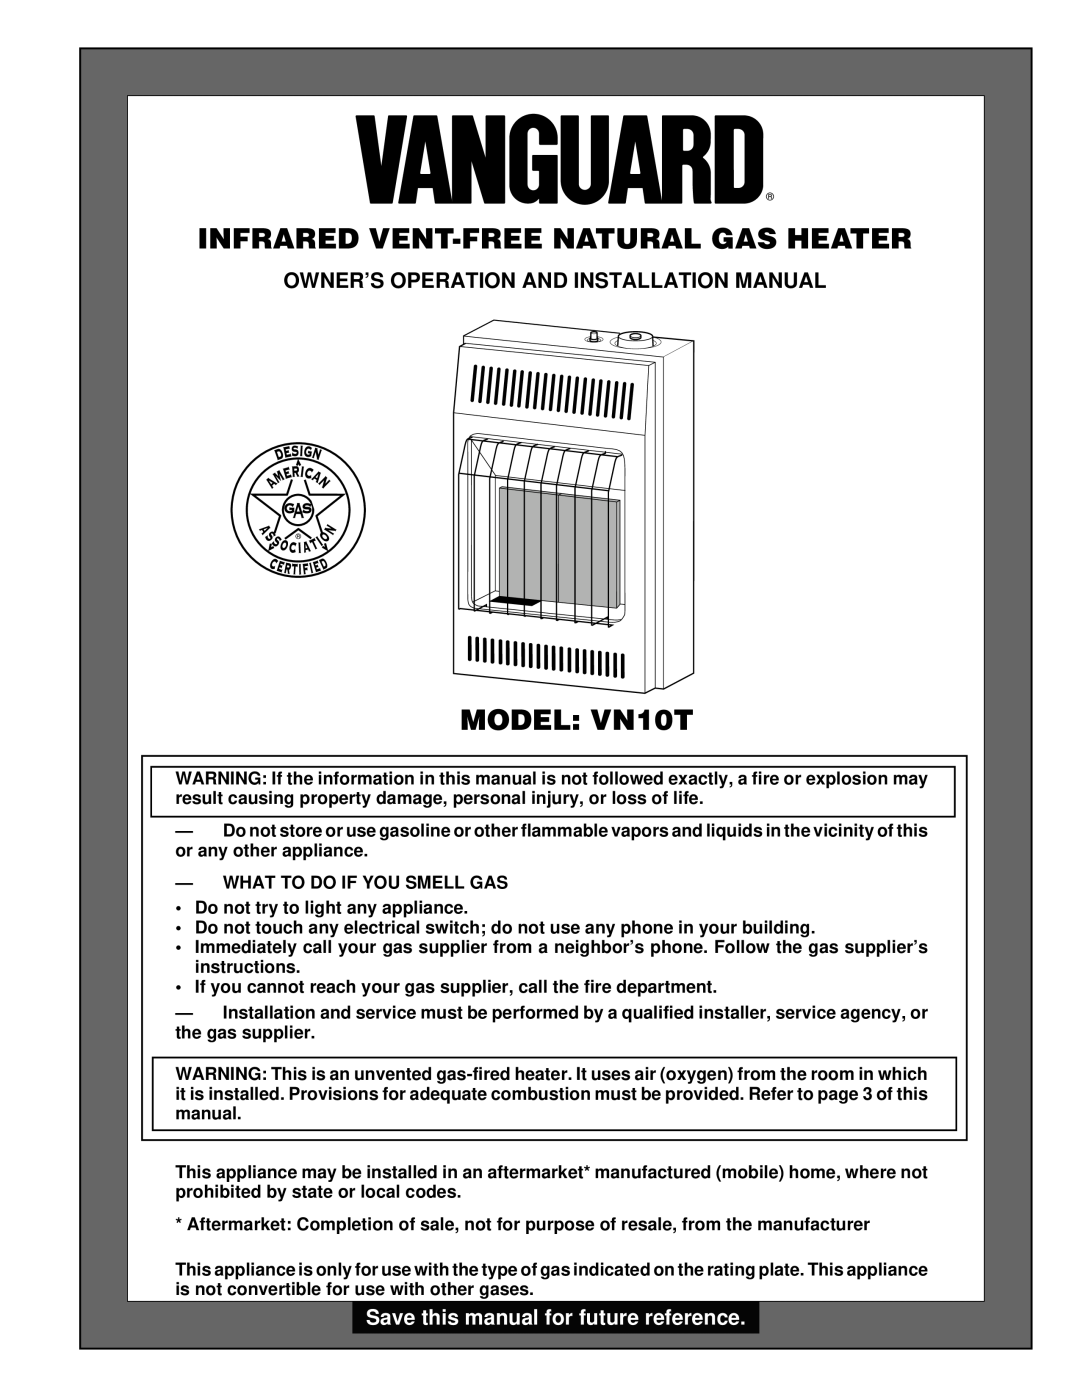 Desa installation manual Infrared Vent-Free Natural Gas Heater, MODEL VN10T, Owner’S Operation And Installation Manual 